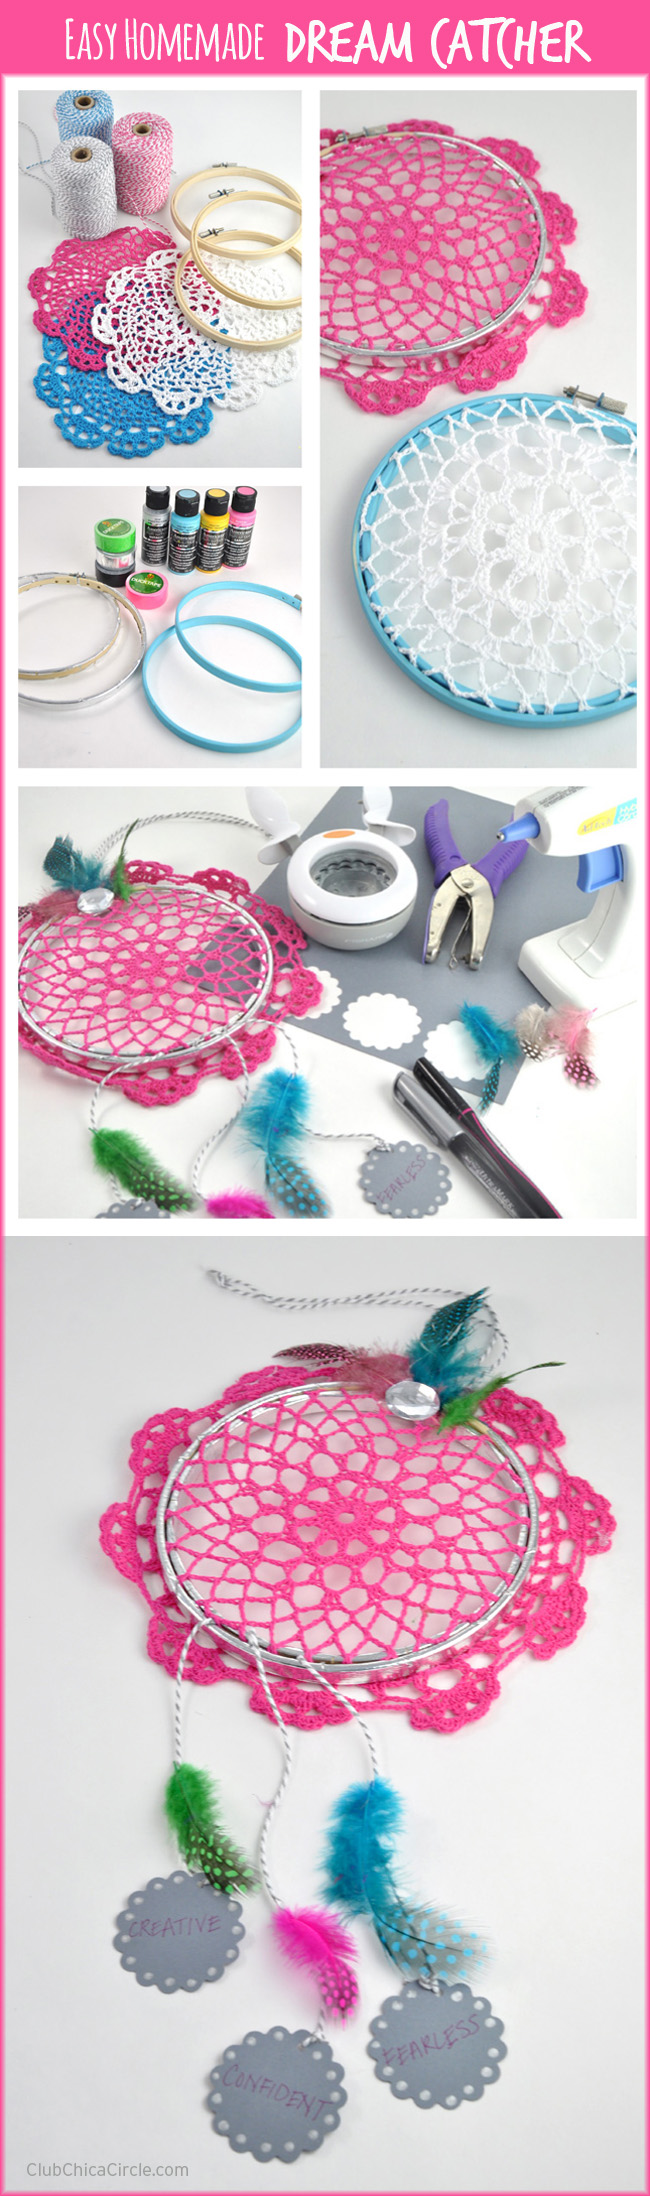 Easy Homemade Dream Catcher DIY with Embroidery Hoops and Doilies